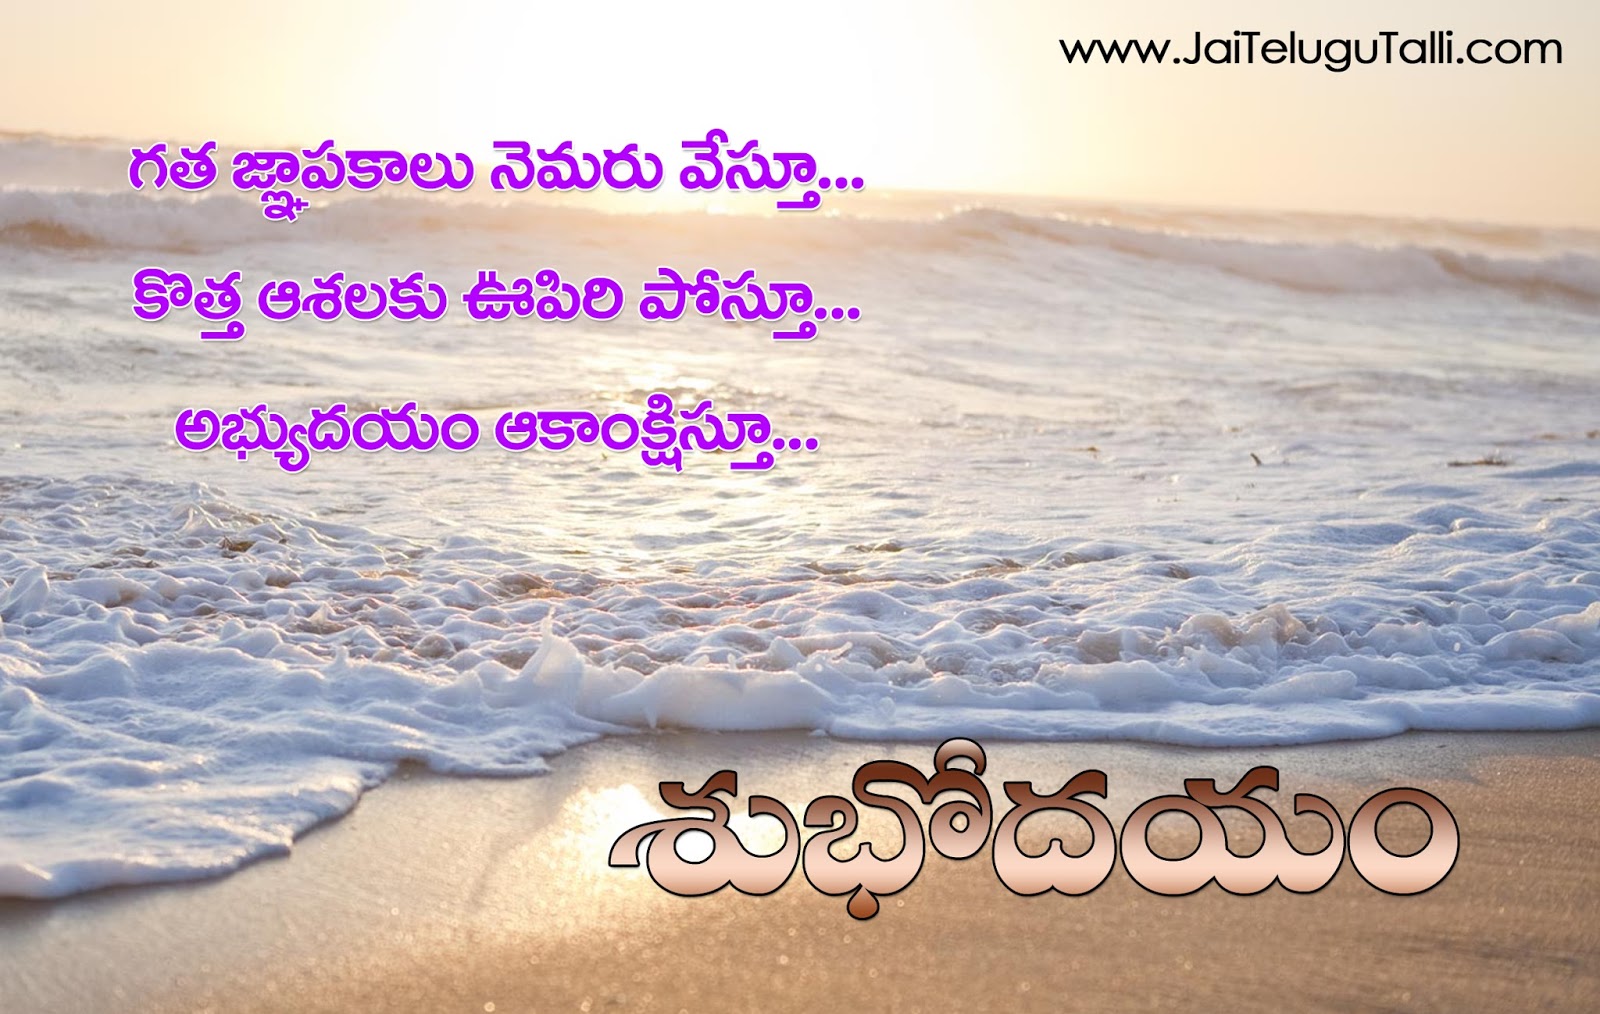 Here is a Heart touching good morning quotes about life Best inspirational quotes about life